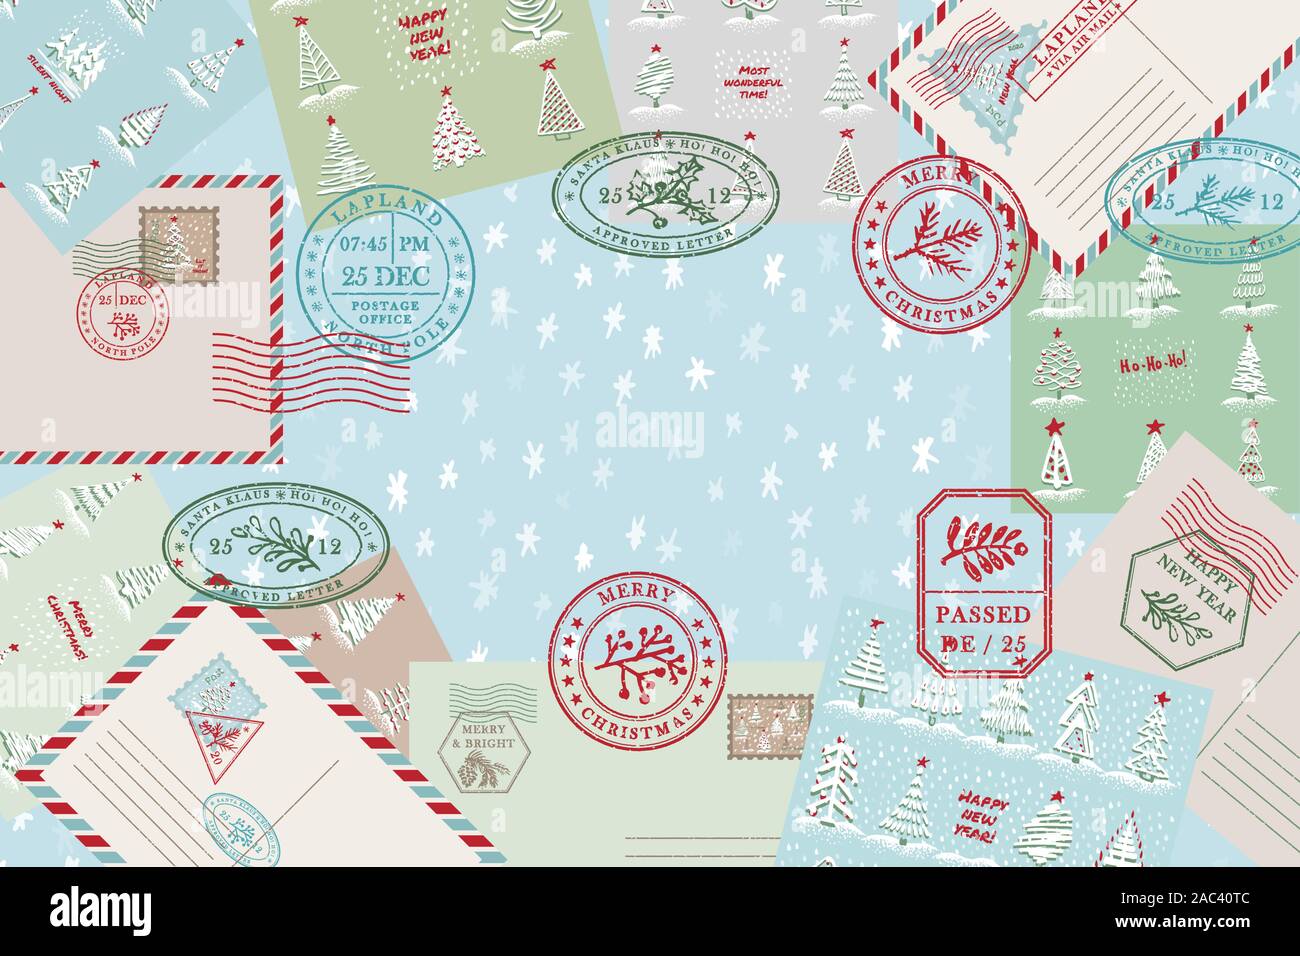 Celebration background with vintage air mail postcard and envelope, textured grunge christmas postage rubber stamps Xmas holiday symbols in Stock Vector